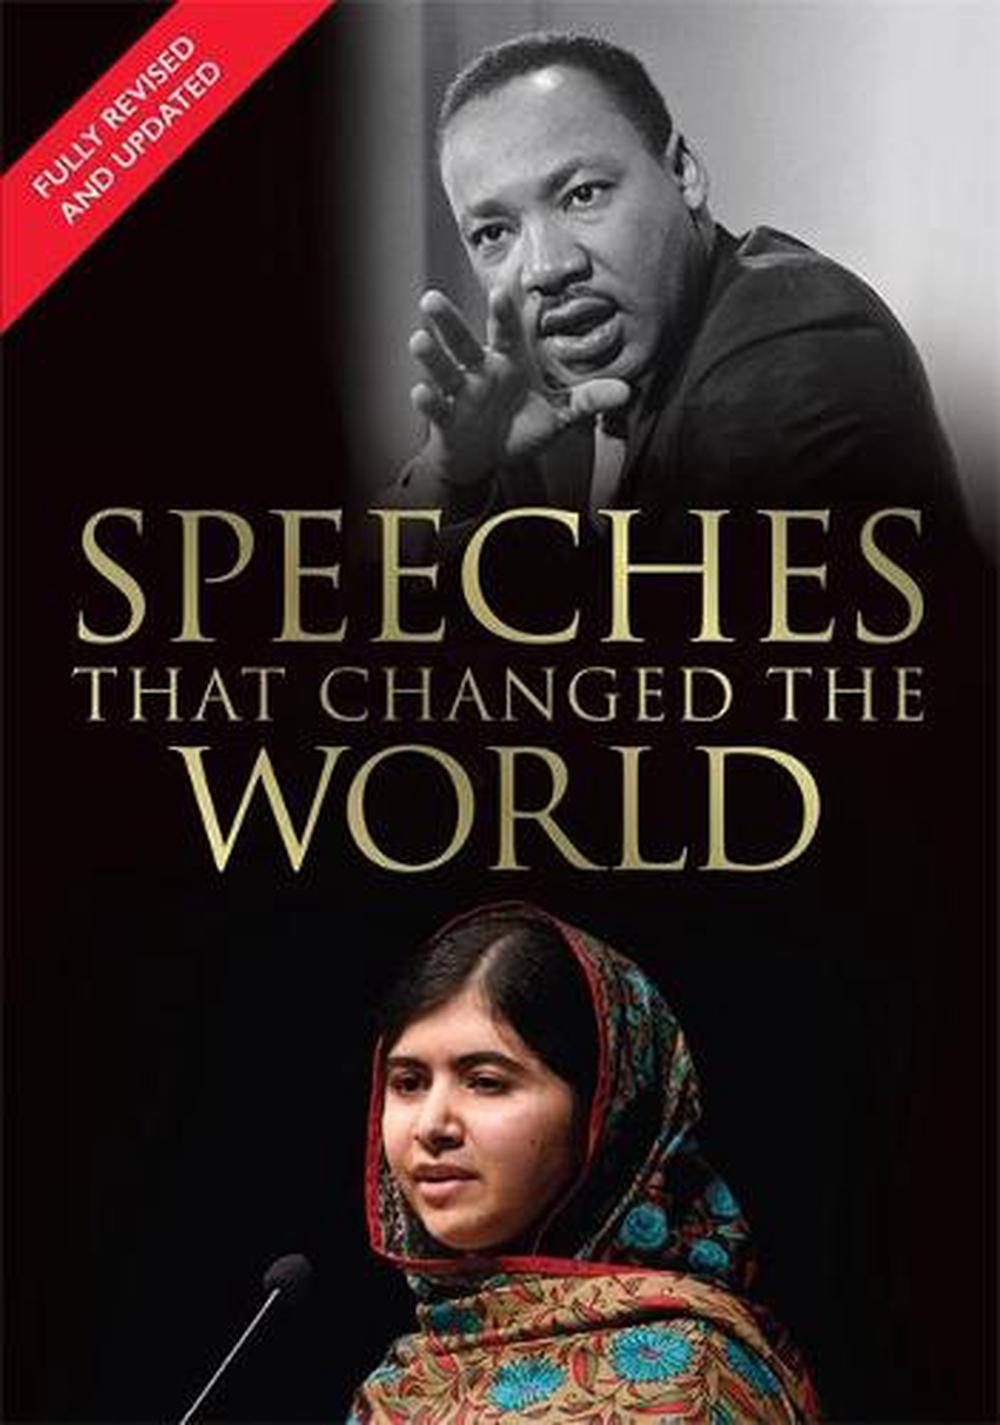 powerful speeches that changed the world pdf